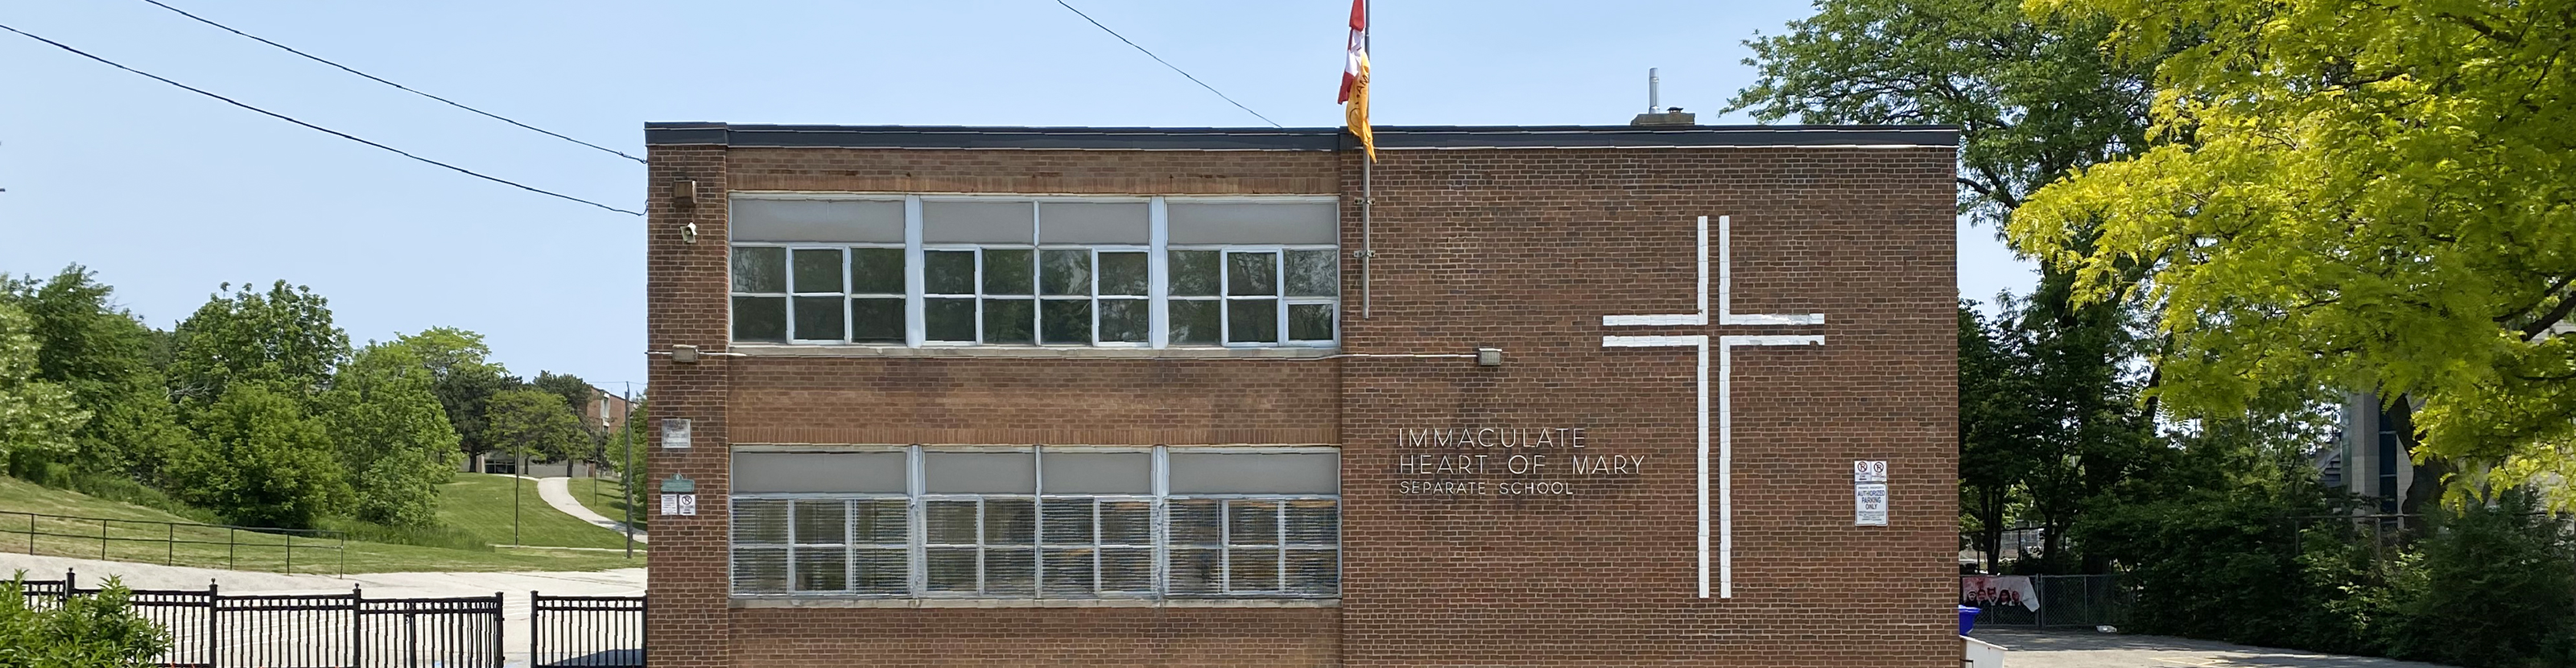 The front of the Immaculate Heart of Mary Catholic School building